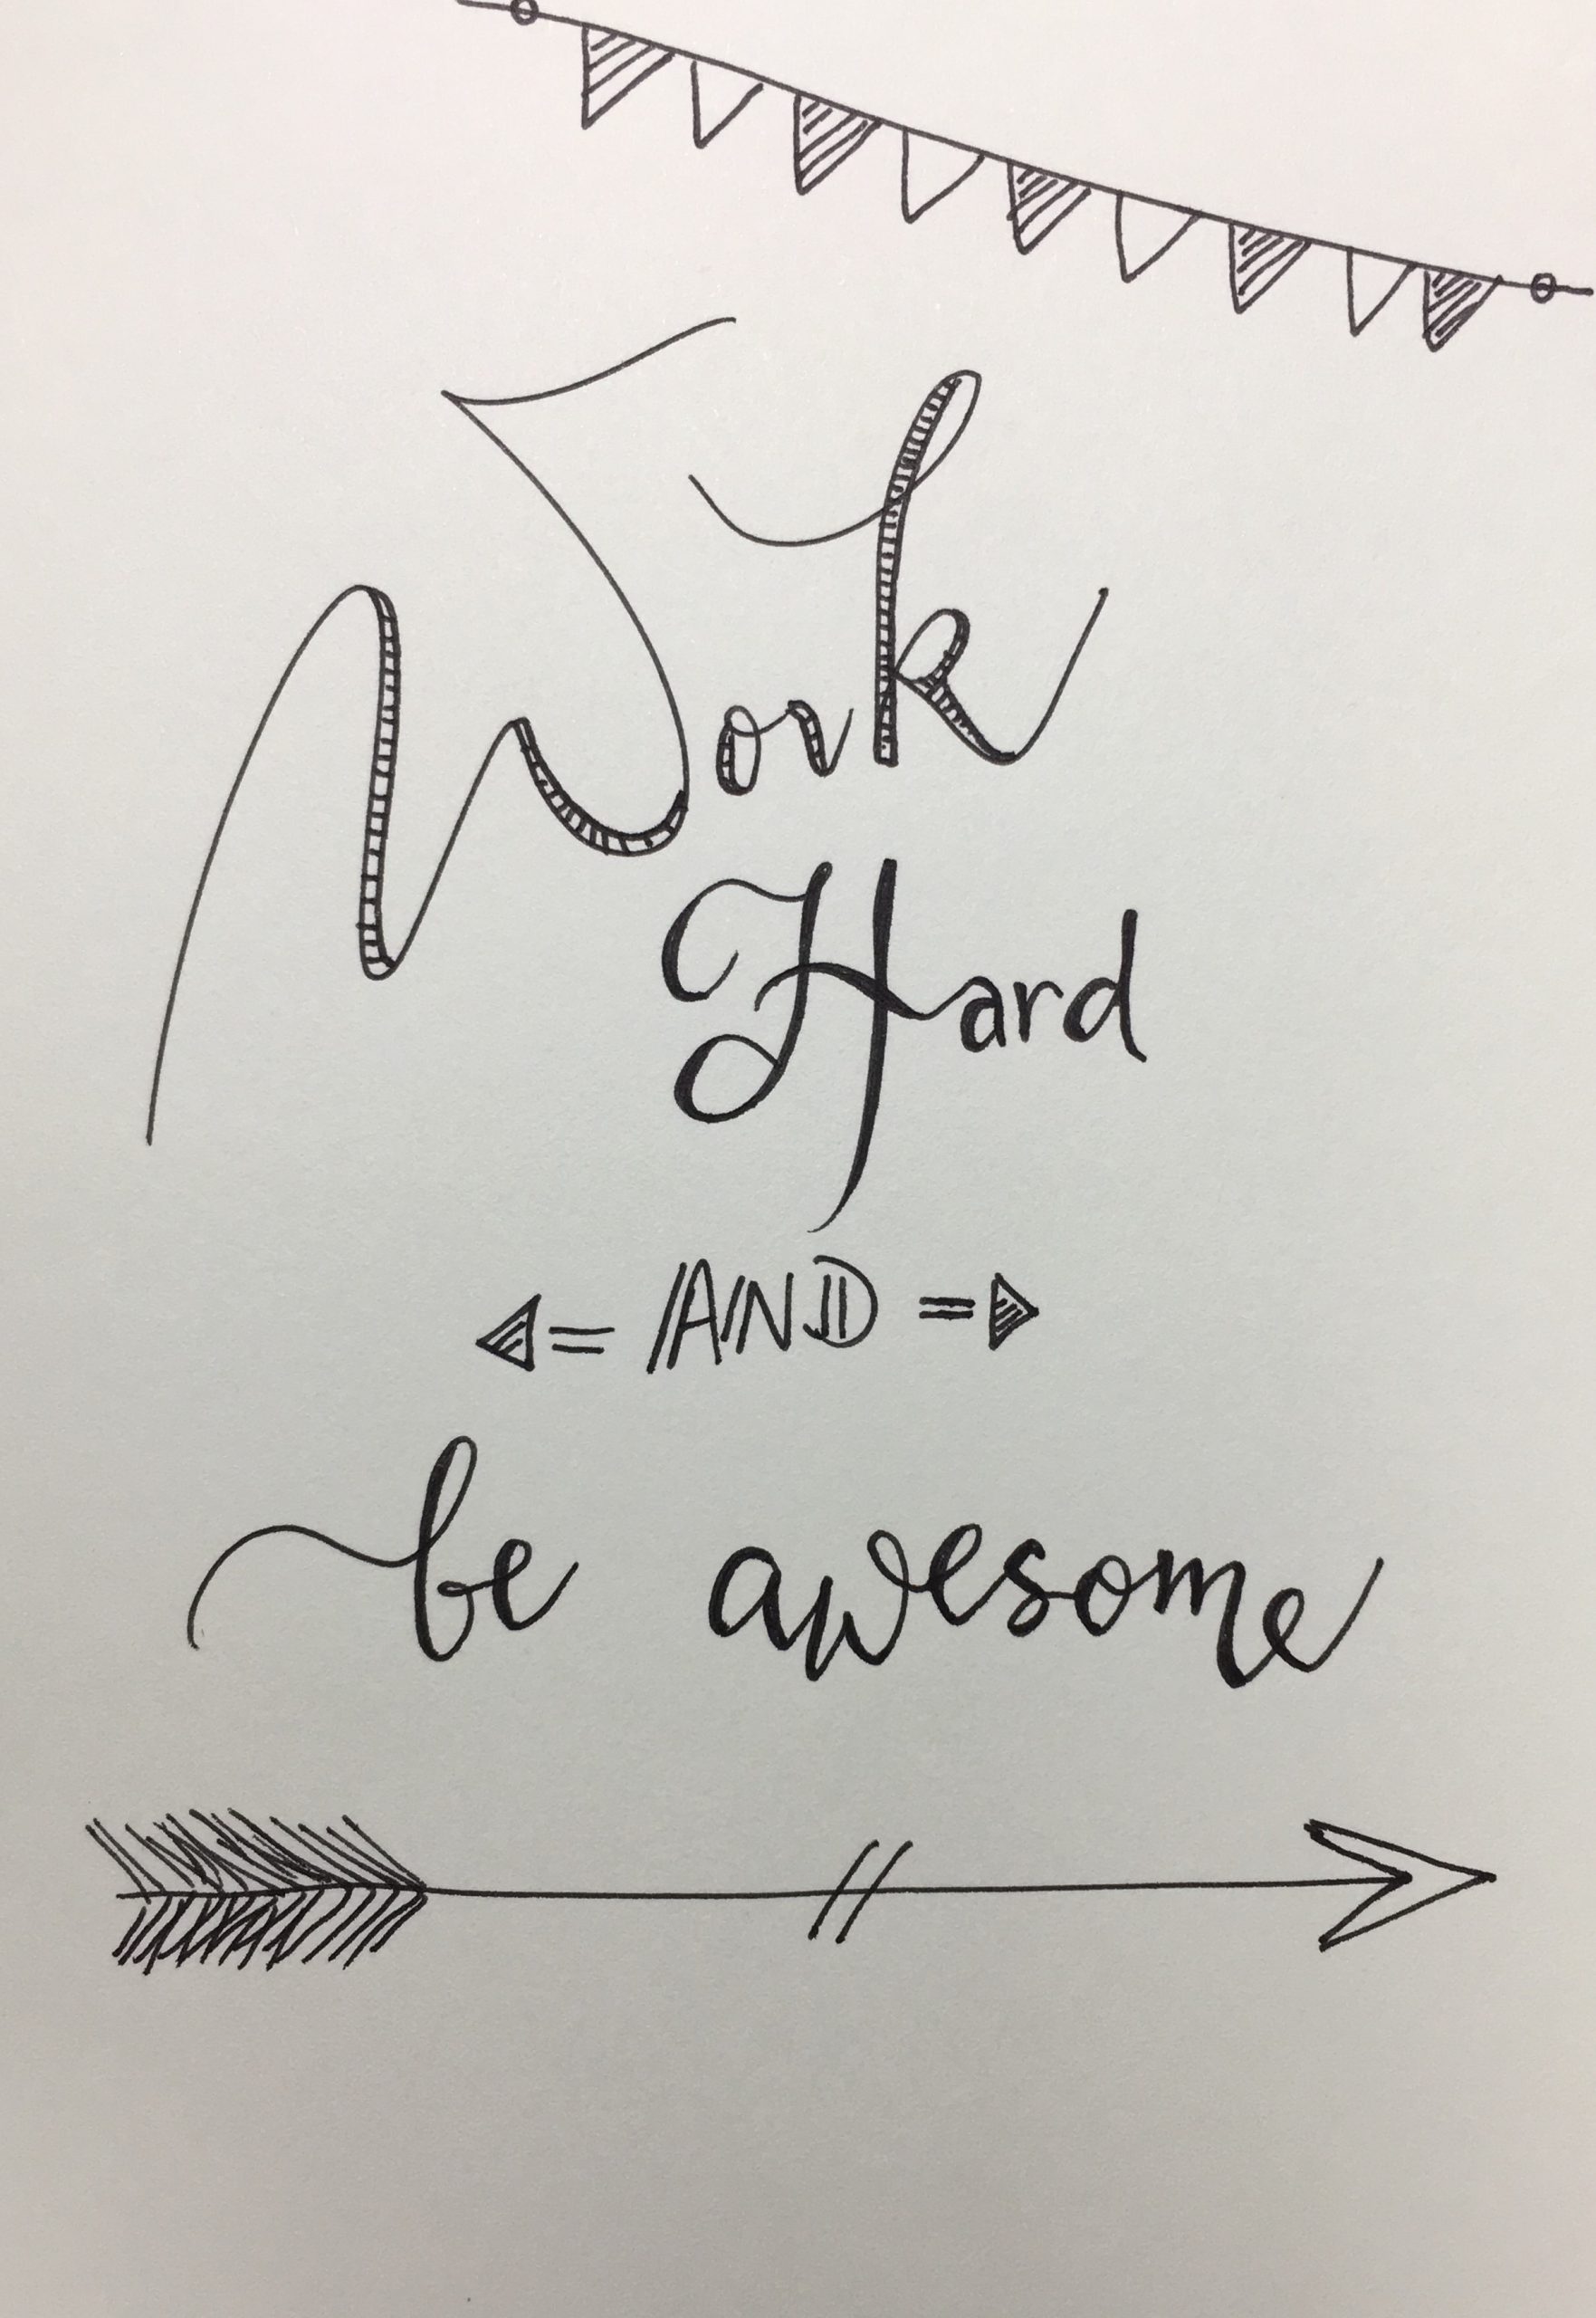 Work Hard and be Awesome